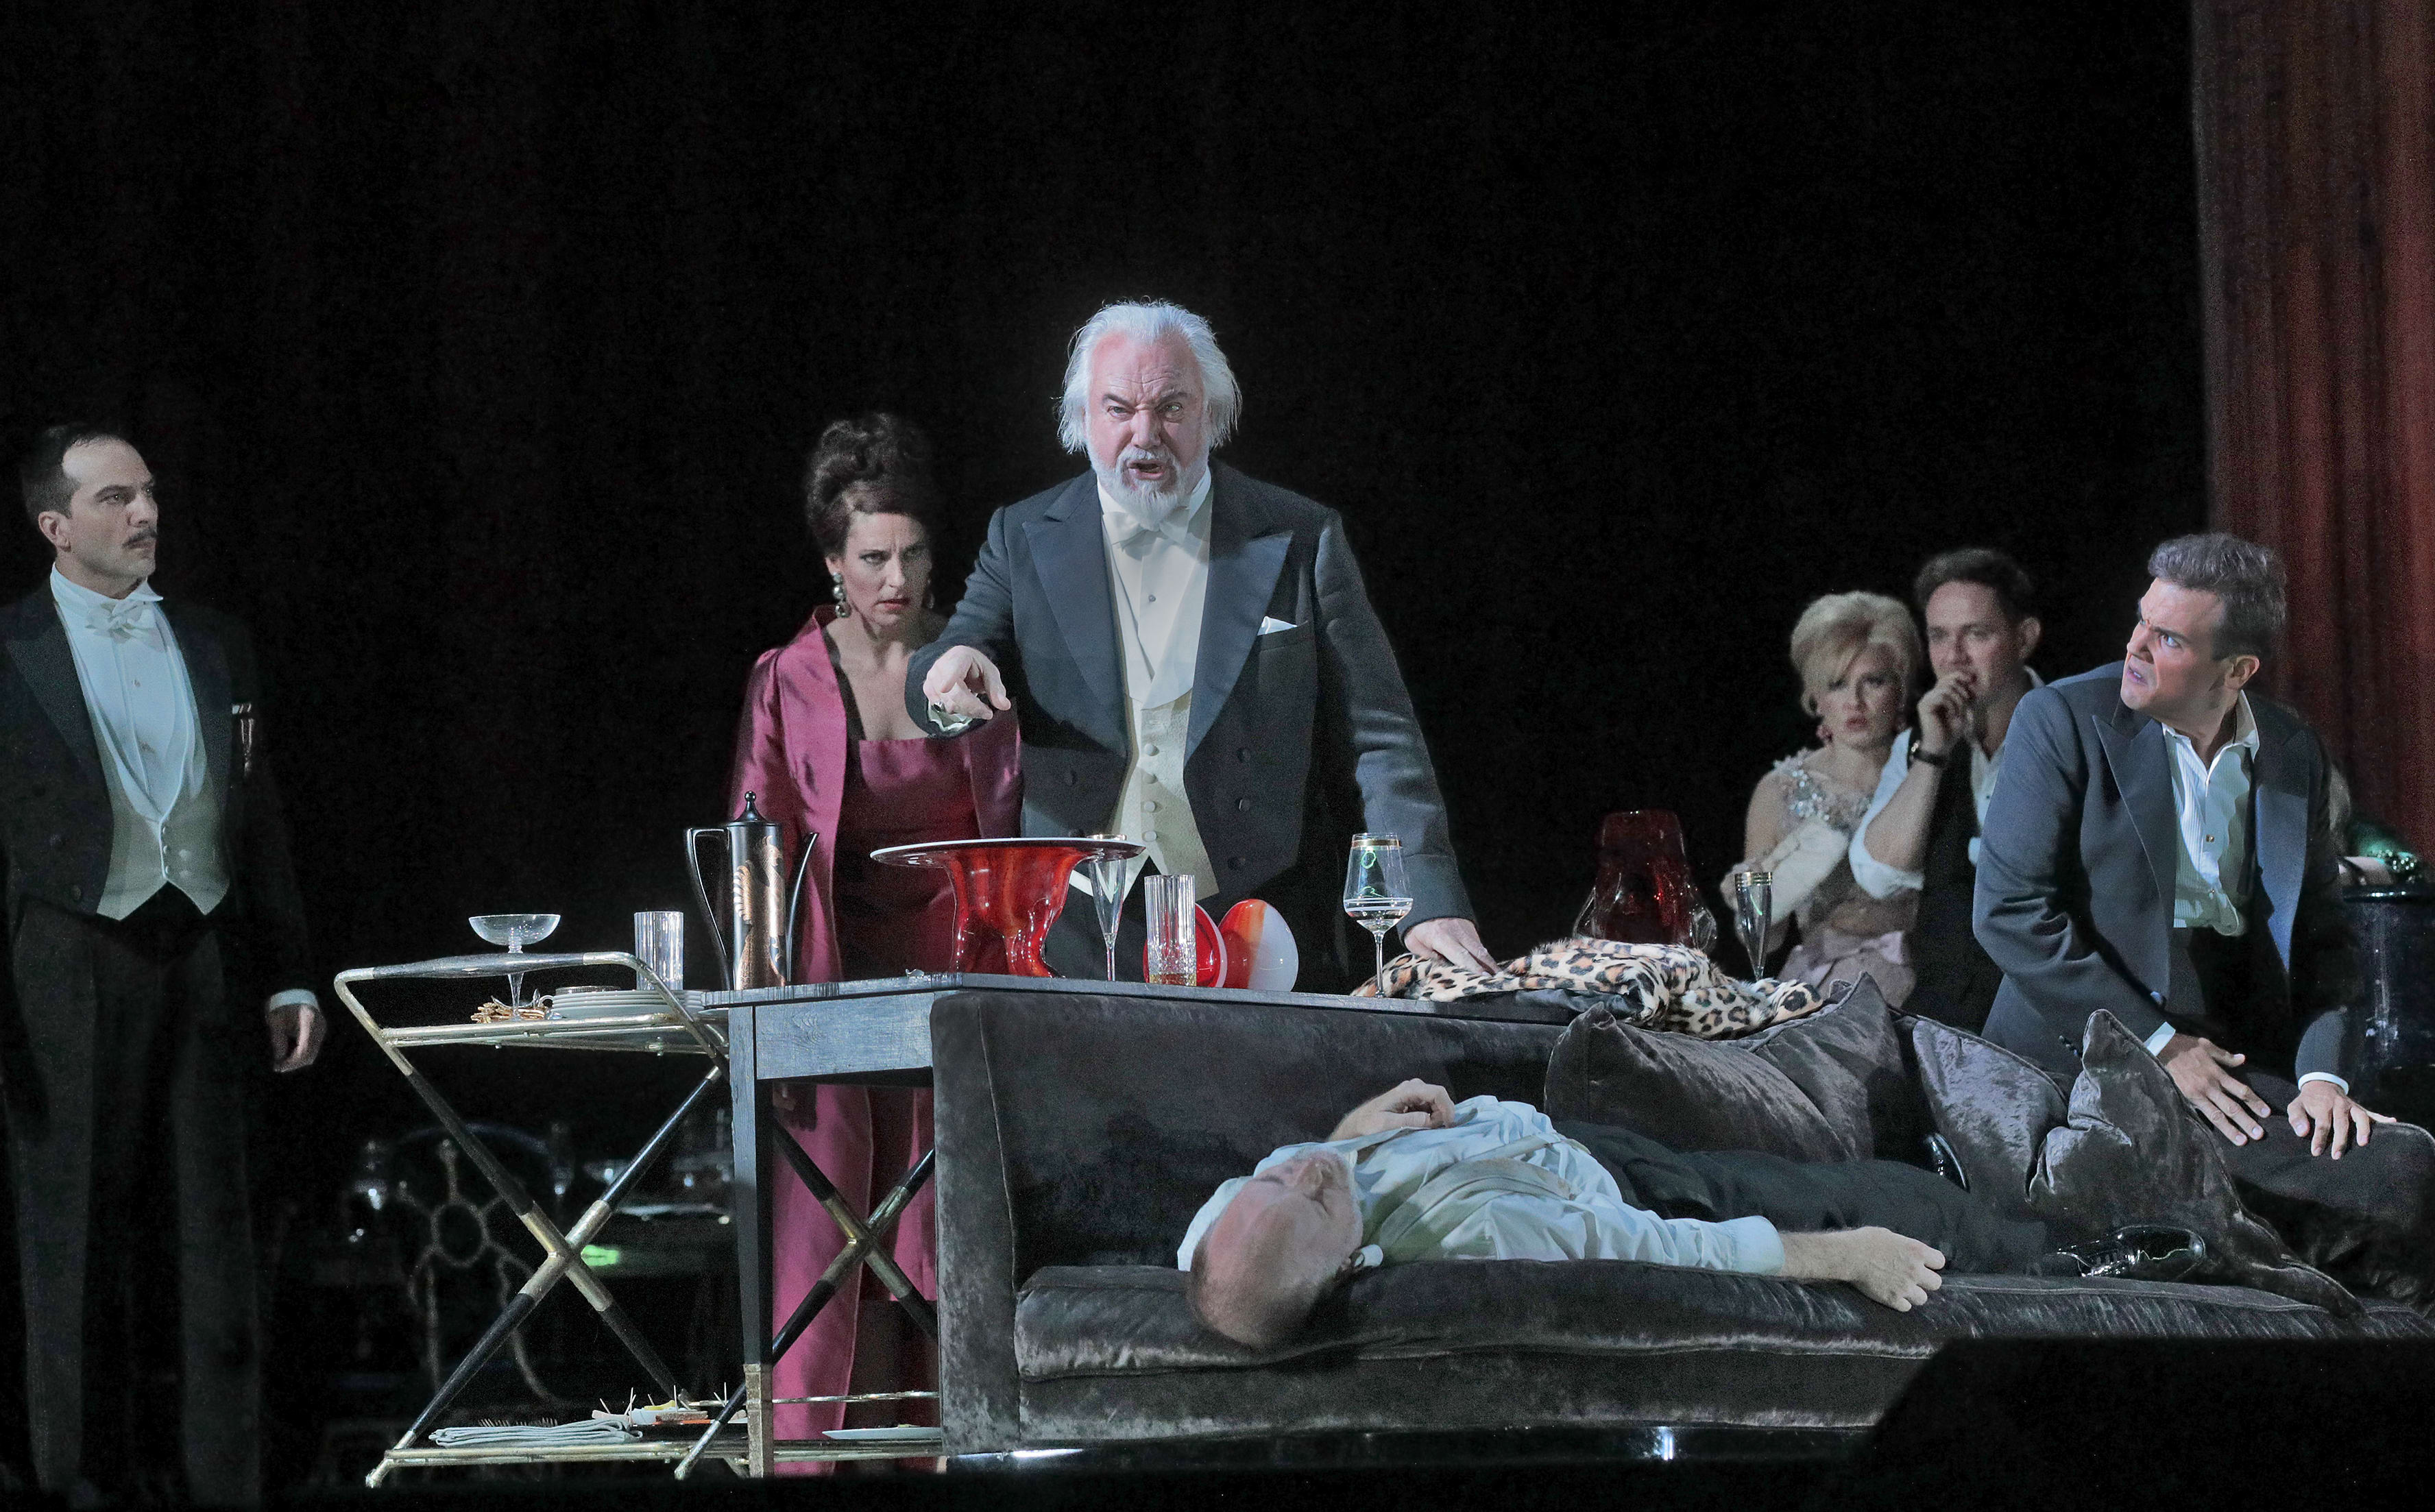 A scene from The Exterminating Angel at Metropolitan Opera